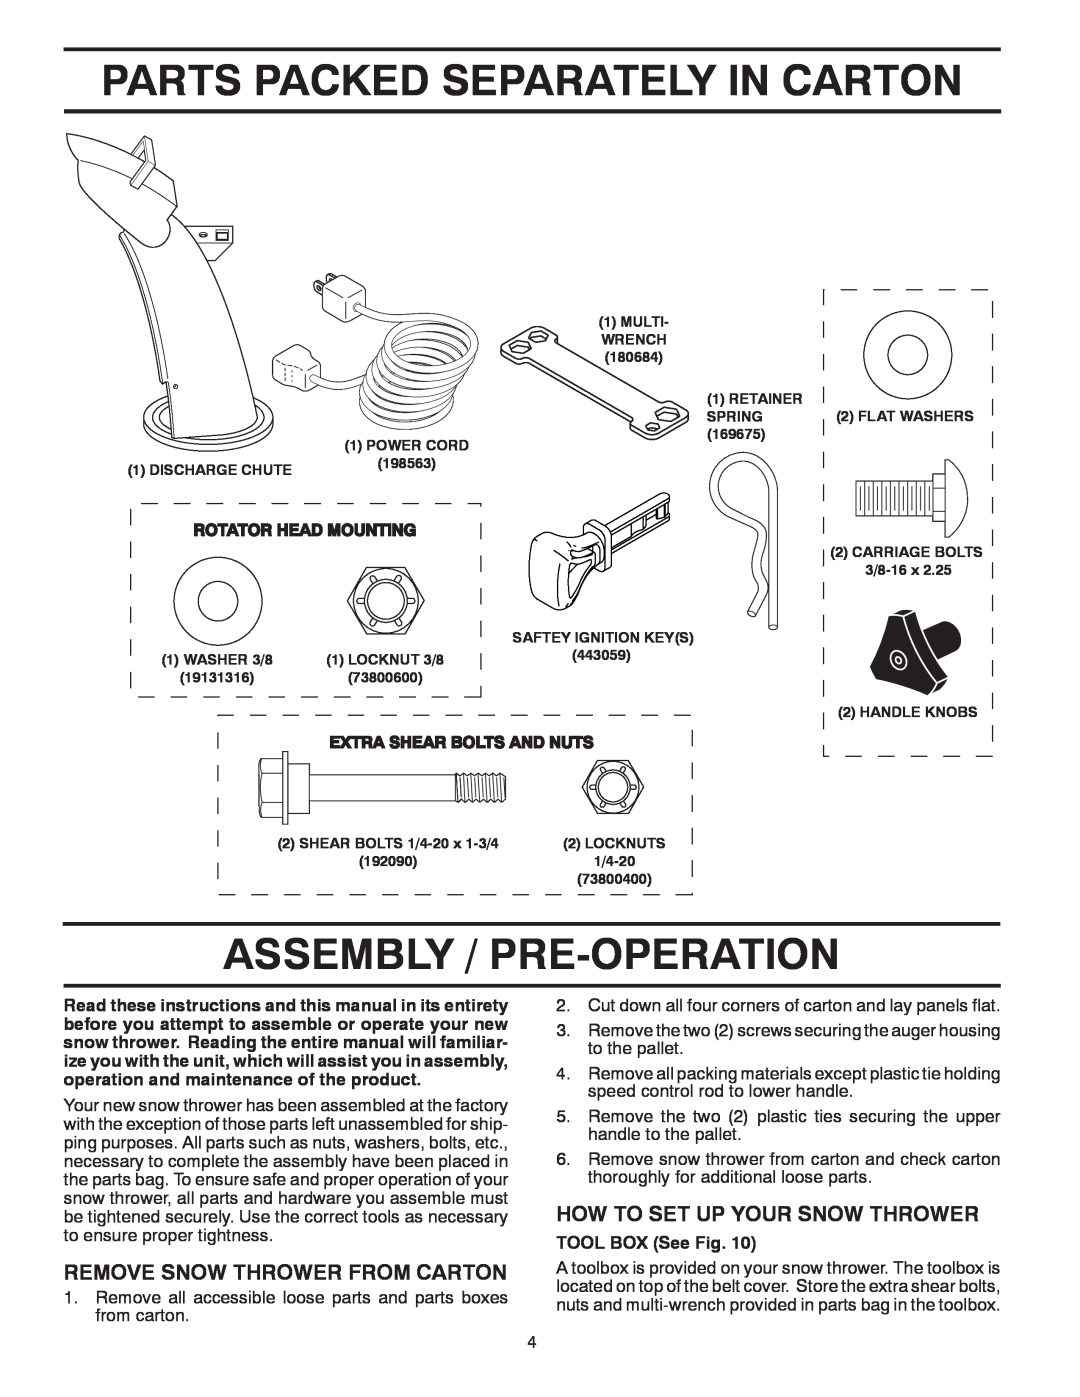 Poulan P14530ES owner manual Parts Packed Separately In Carton, Assembly / Pre-Operation, Remove Snow Thrower From Carton 